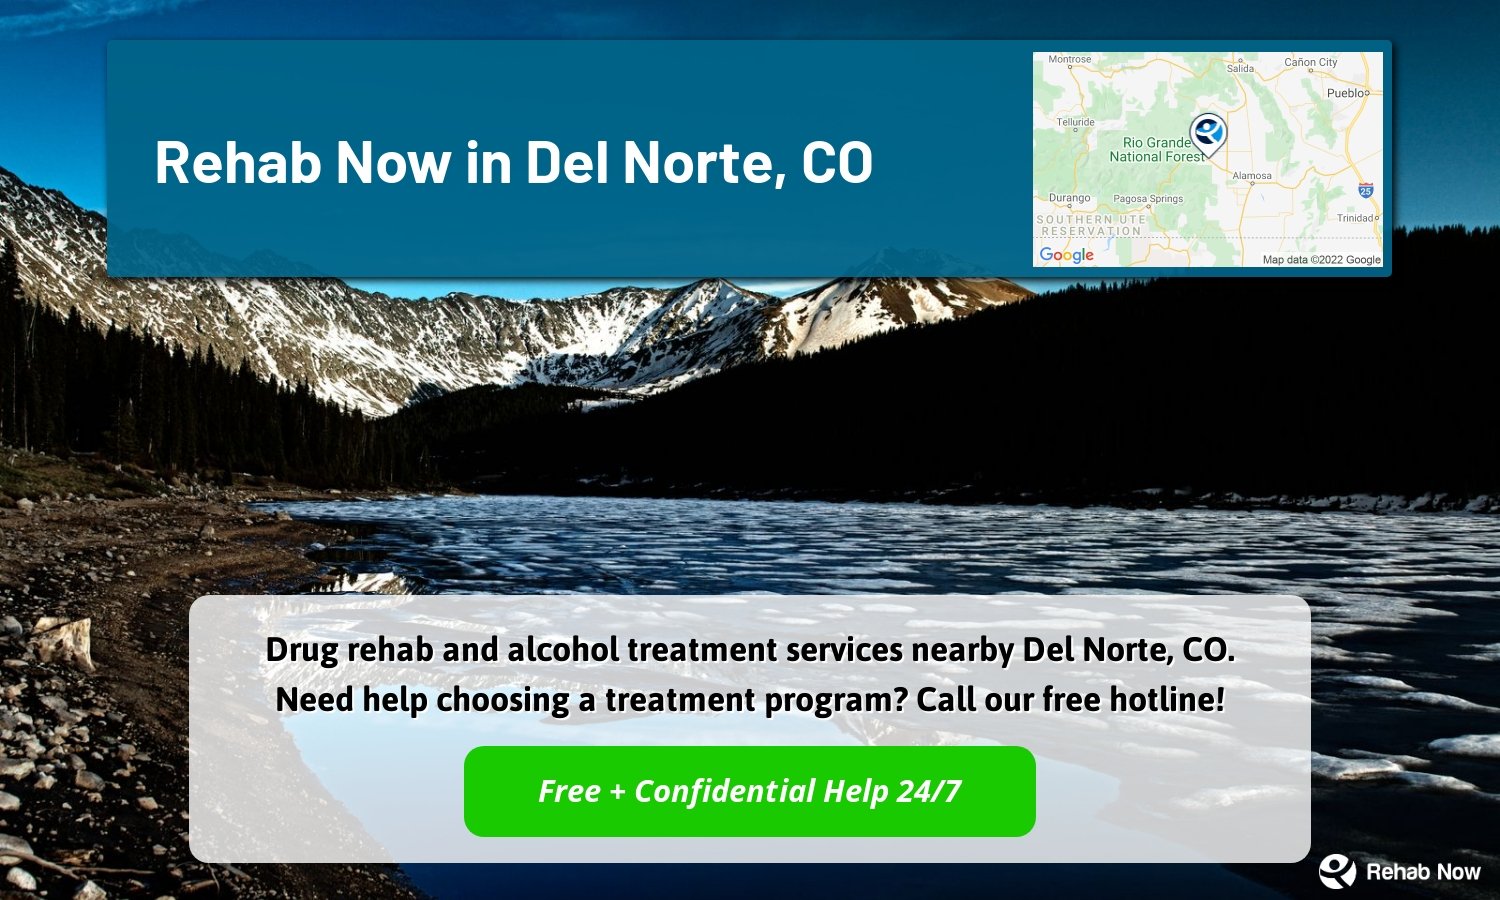 Drug rehab and alcohol treatment services nearby Del Norte, CO. Need help choosing a treatment program? Call our free hotline!